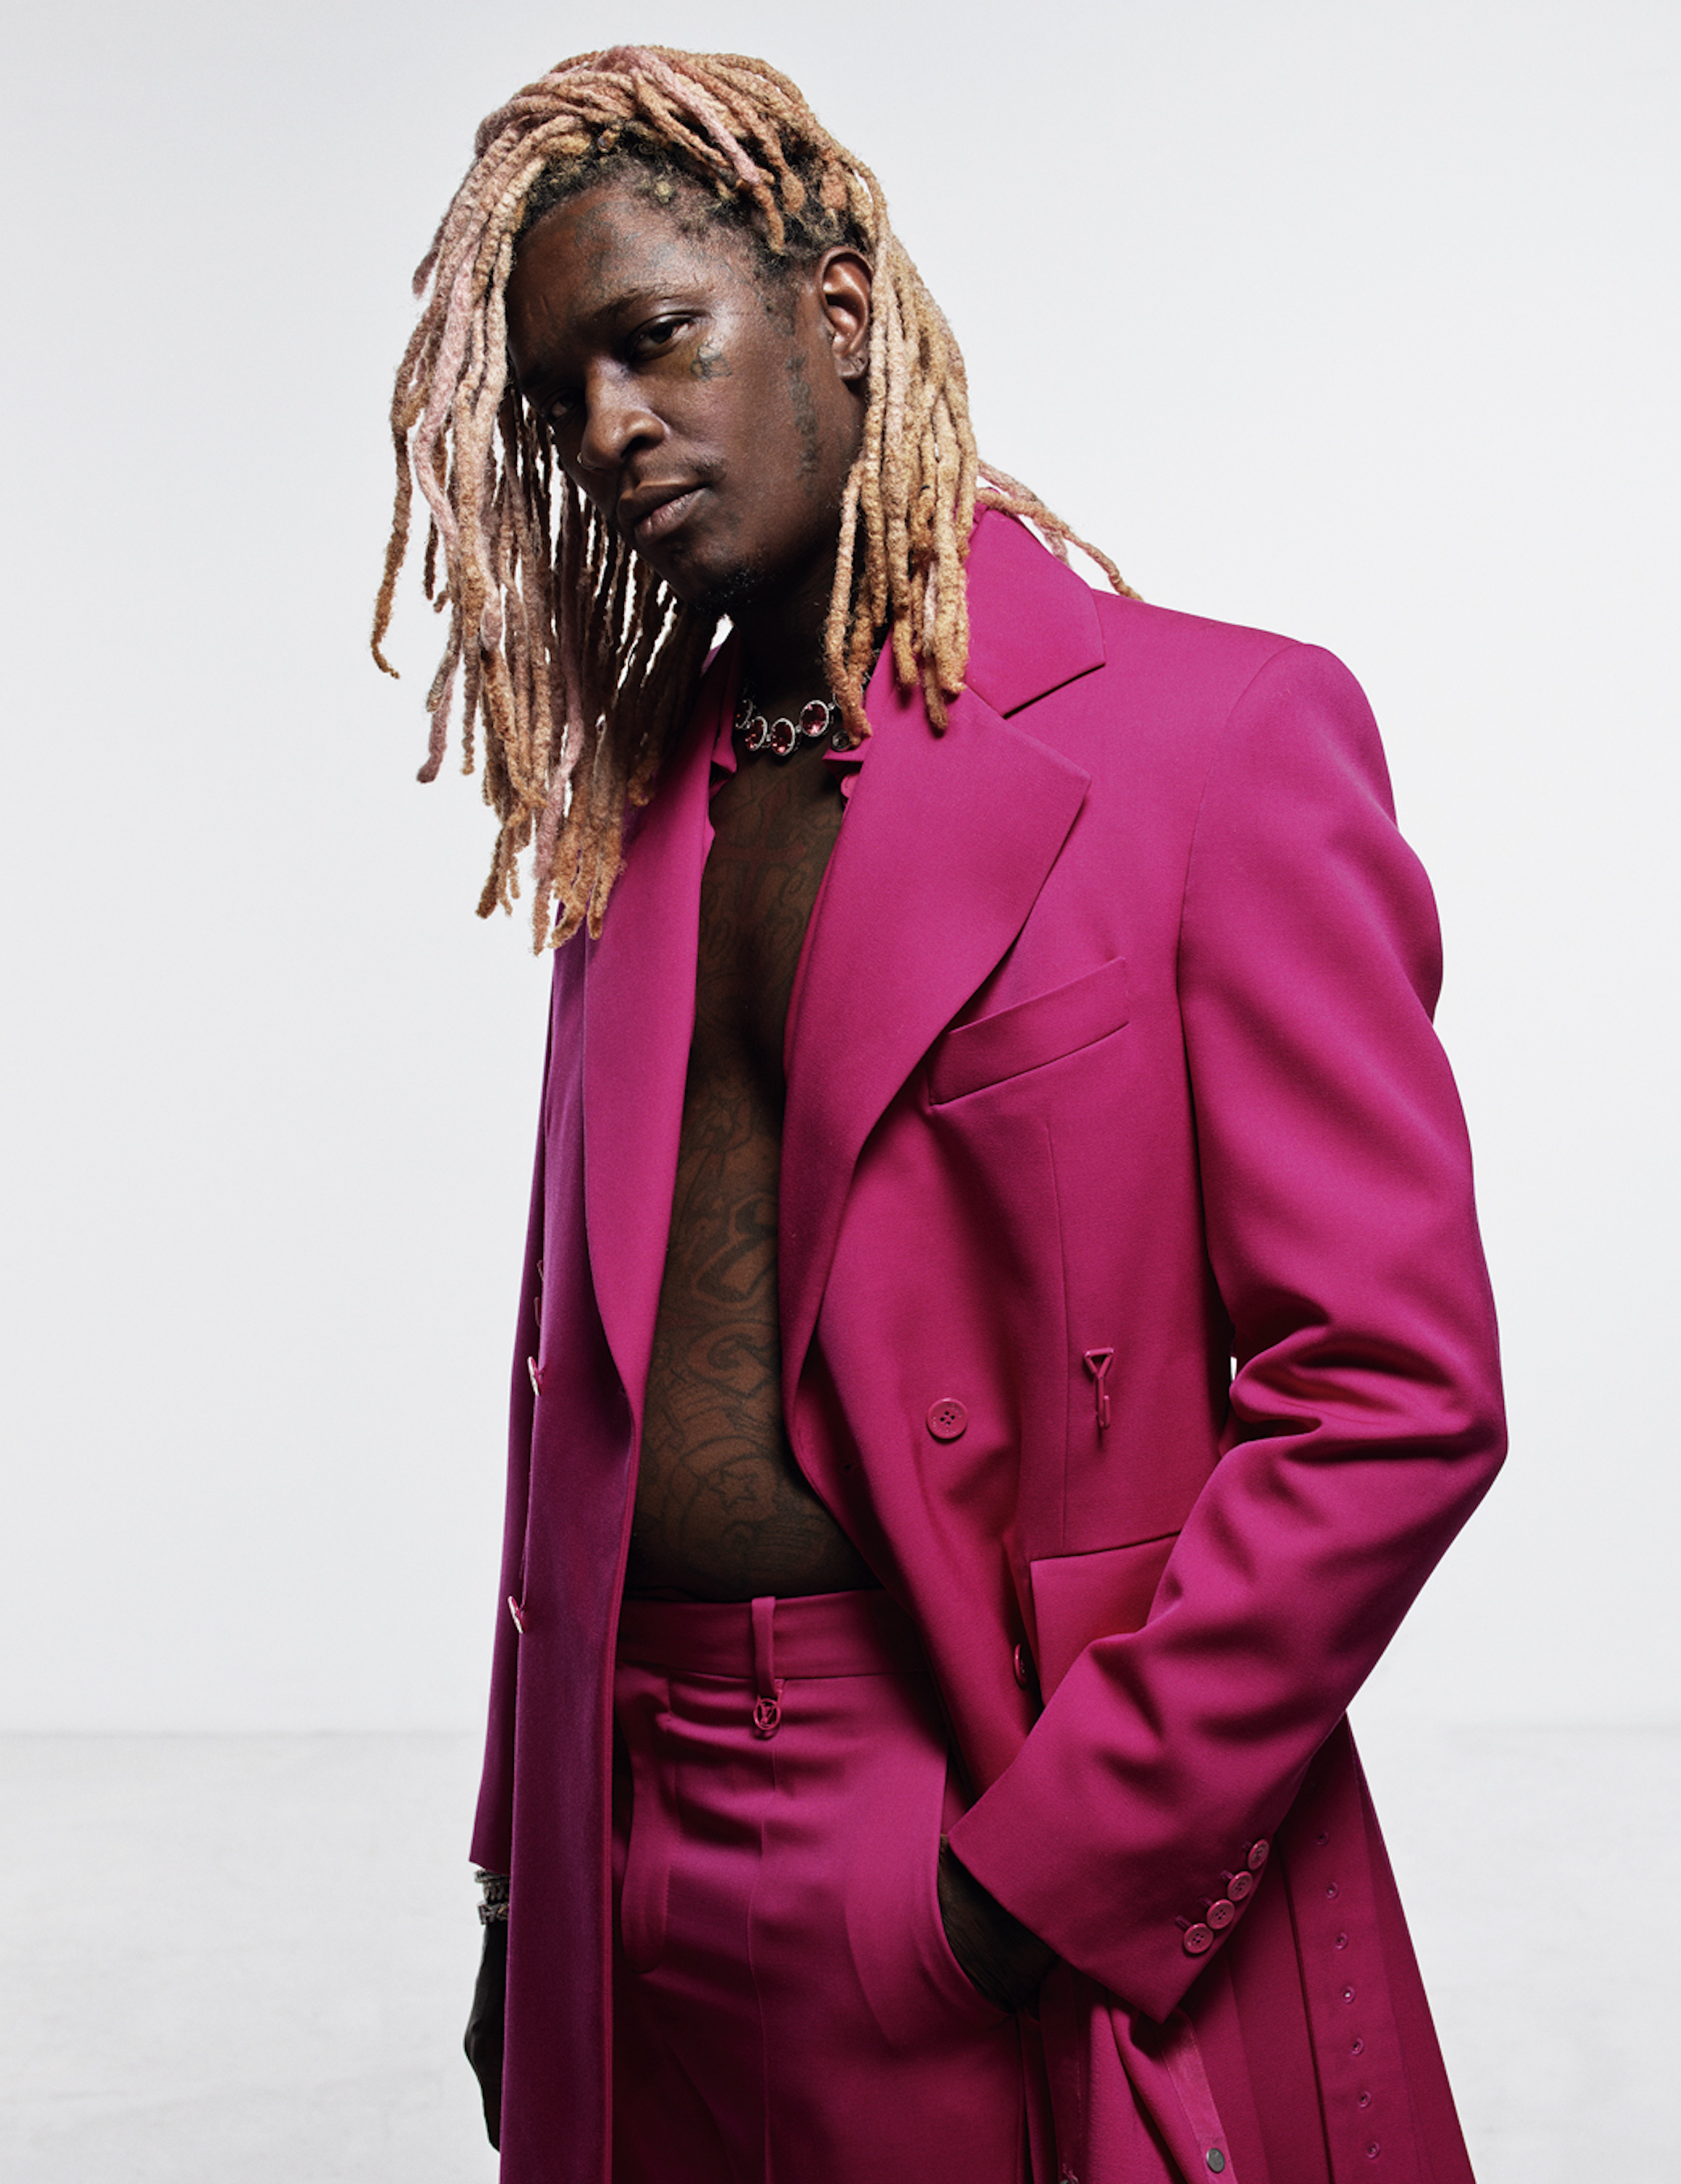 Young Thug wearing a hot pink suit and no shirt with Tiffany jewellery. 